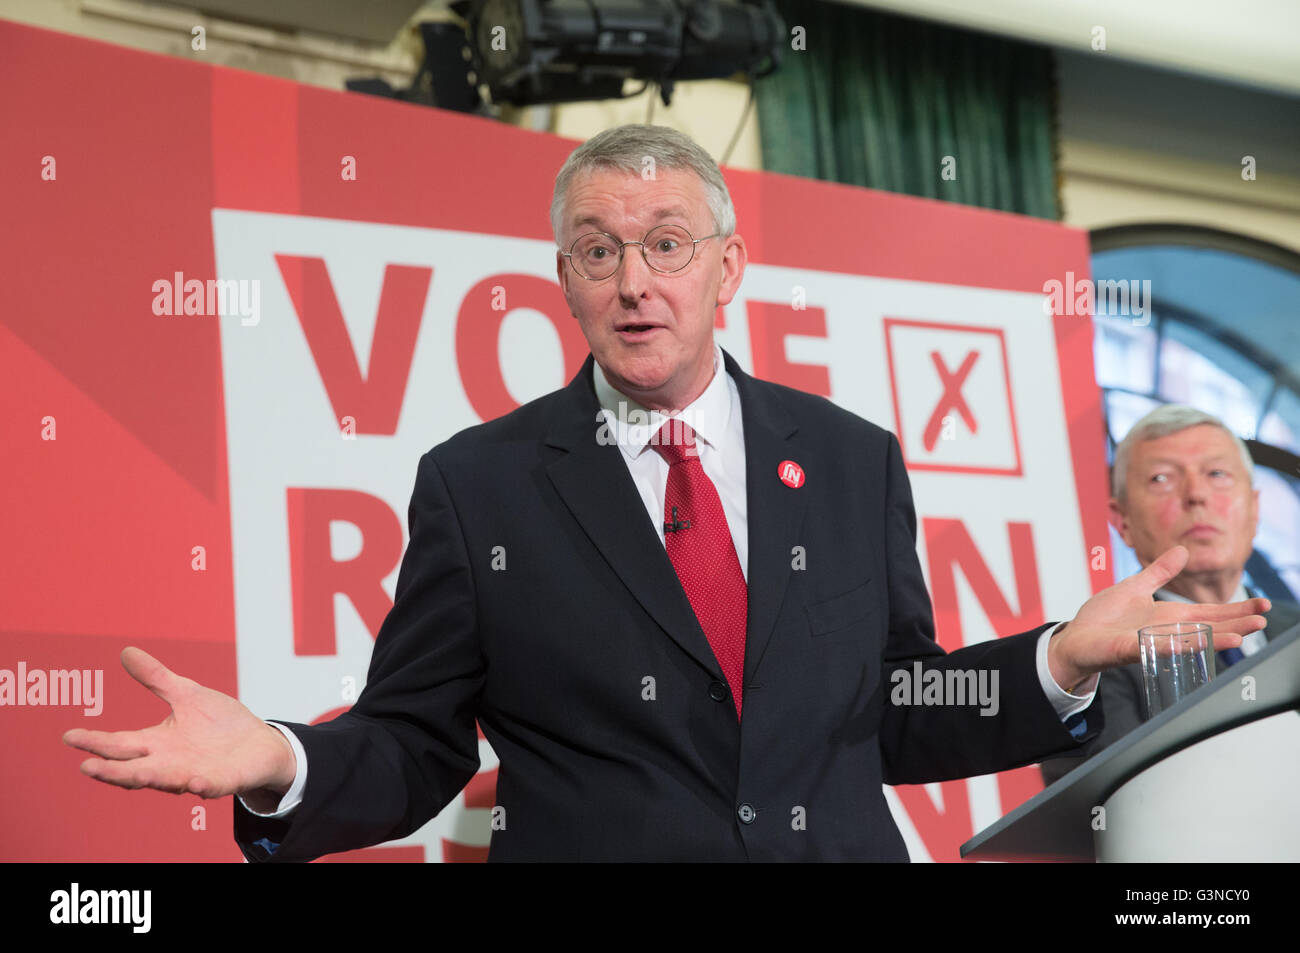 Hilary Benn,shadow foreign secretary,speaks at a 'Vote In' conference in London. Stock Photo